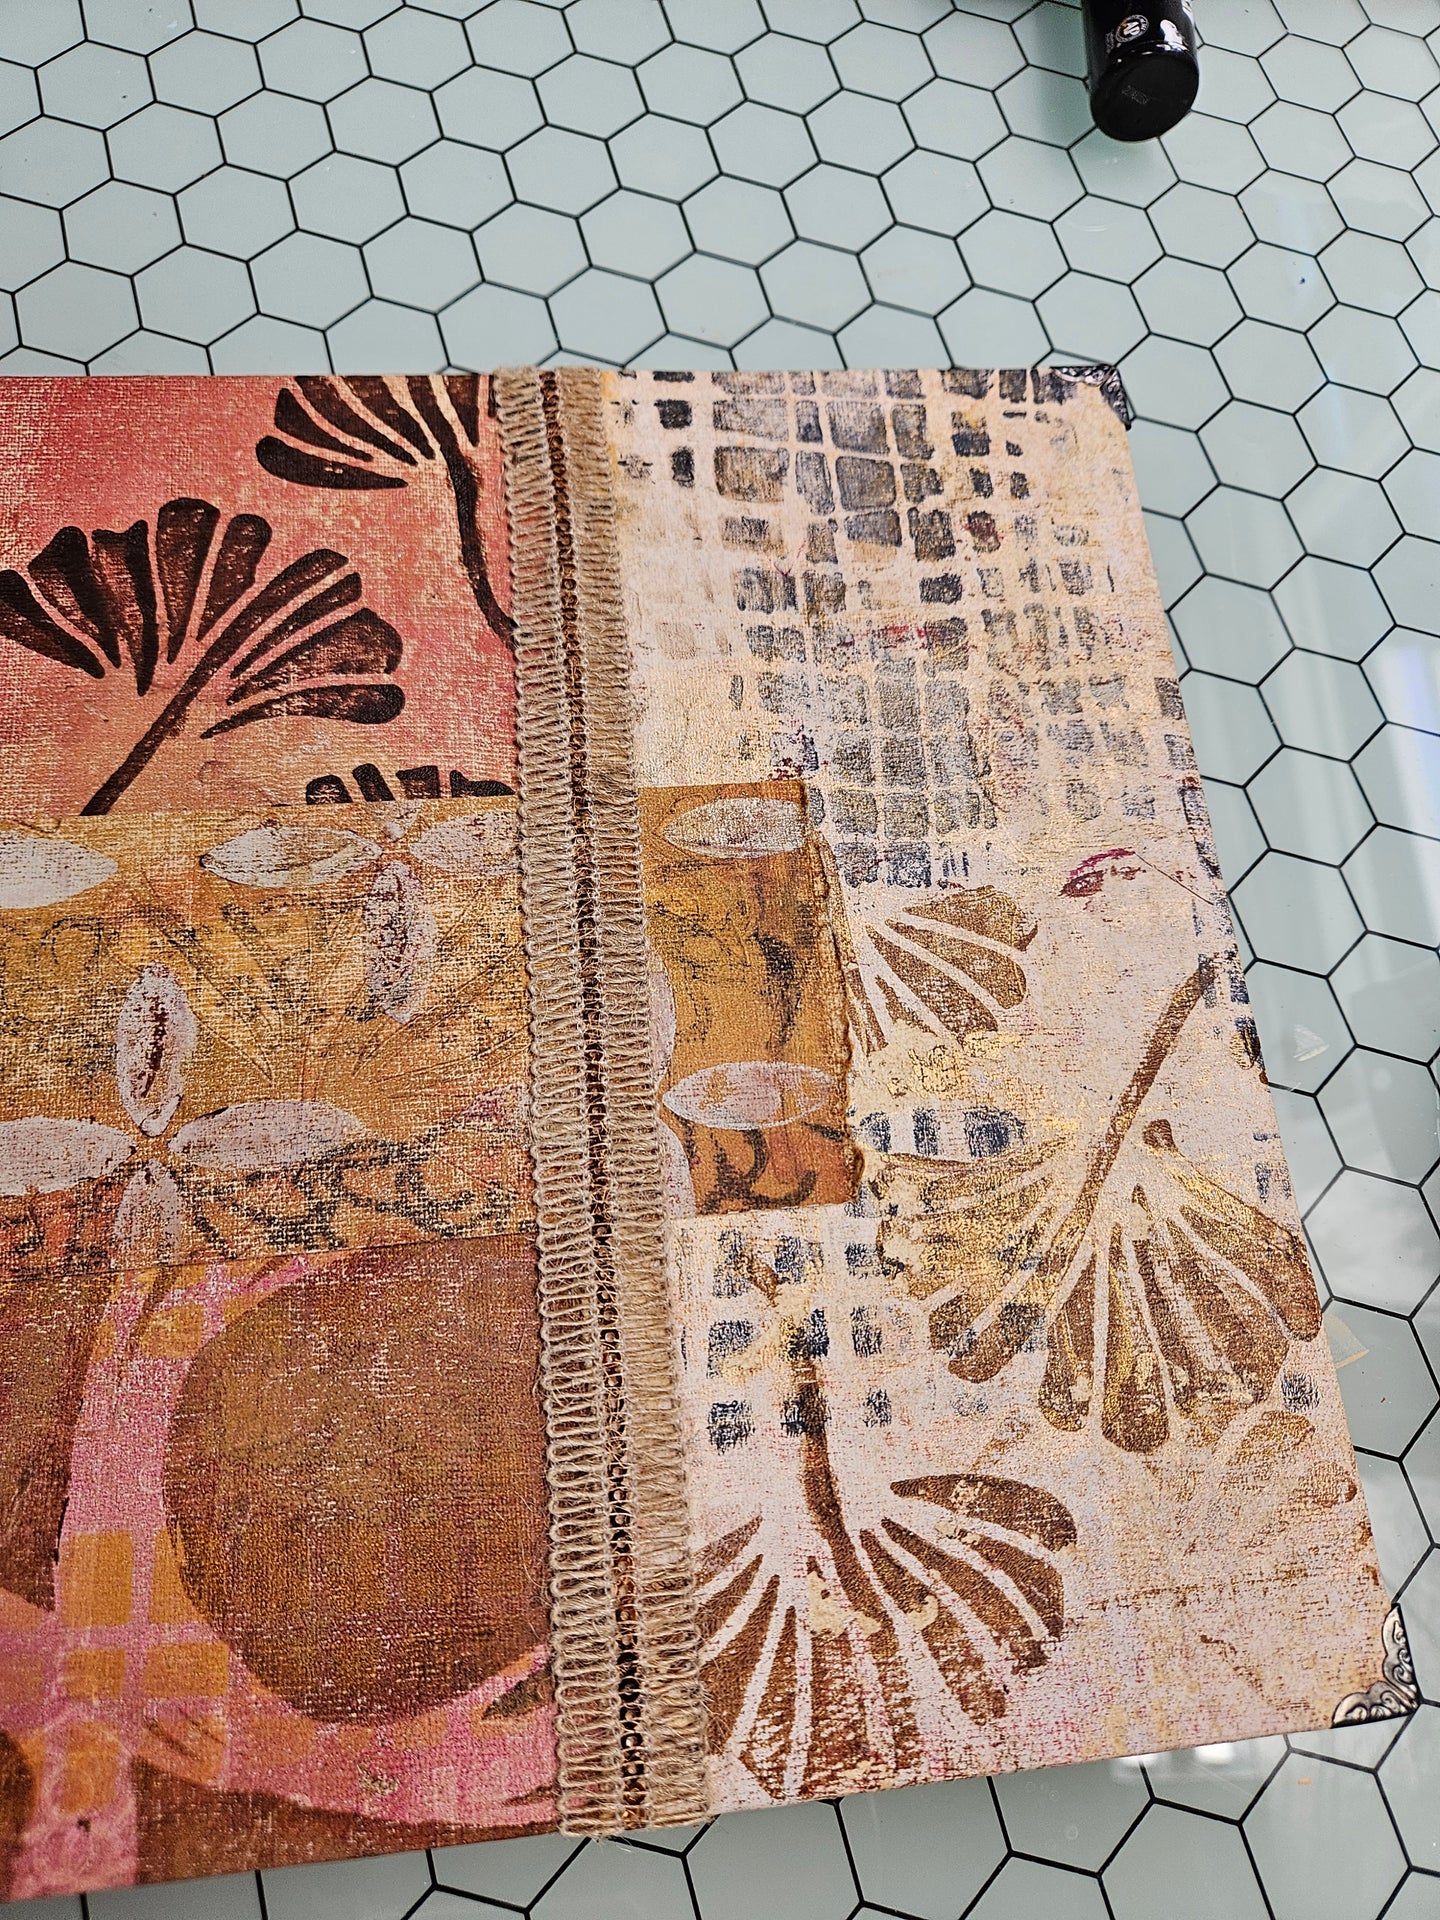 Hand-Painted Concertina Journal: 11.5" x 9" - Blank, Deckled, Vintage Cotton Recycled Paper Inside